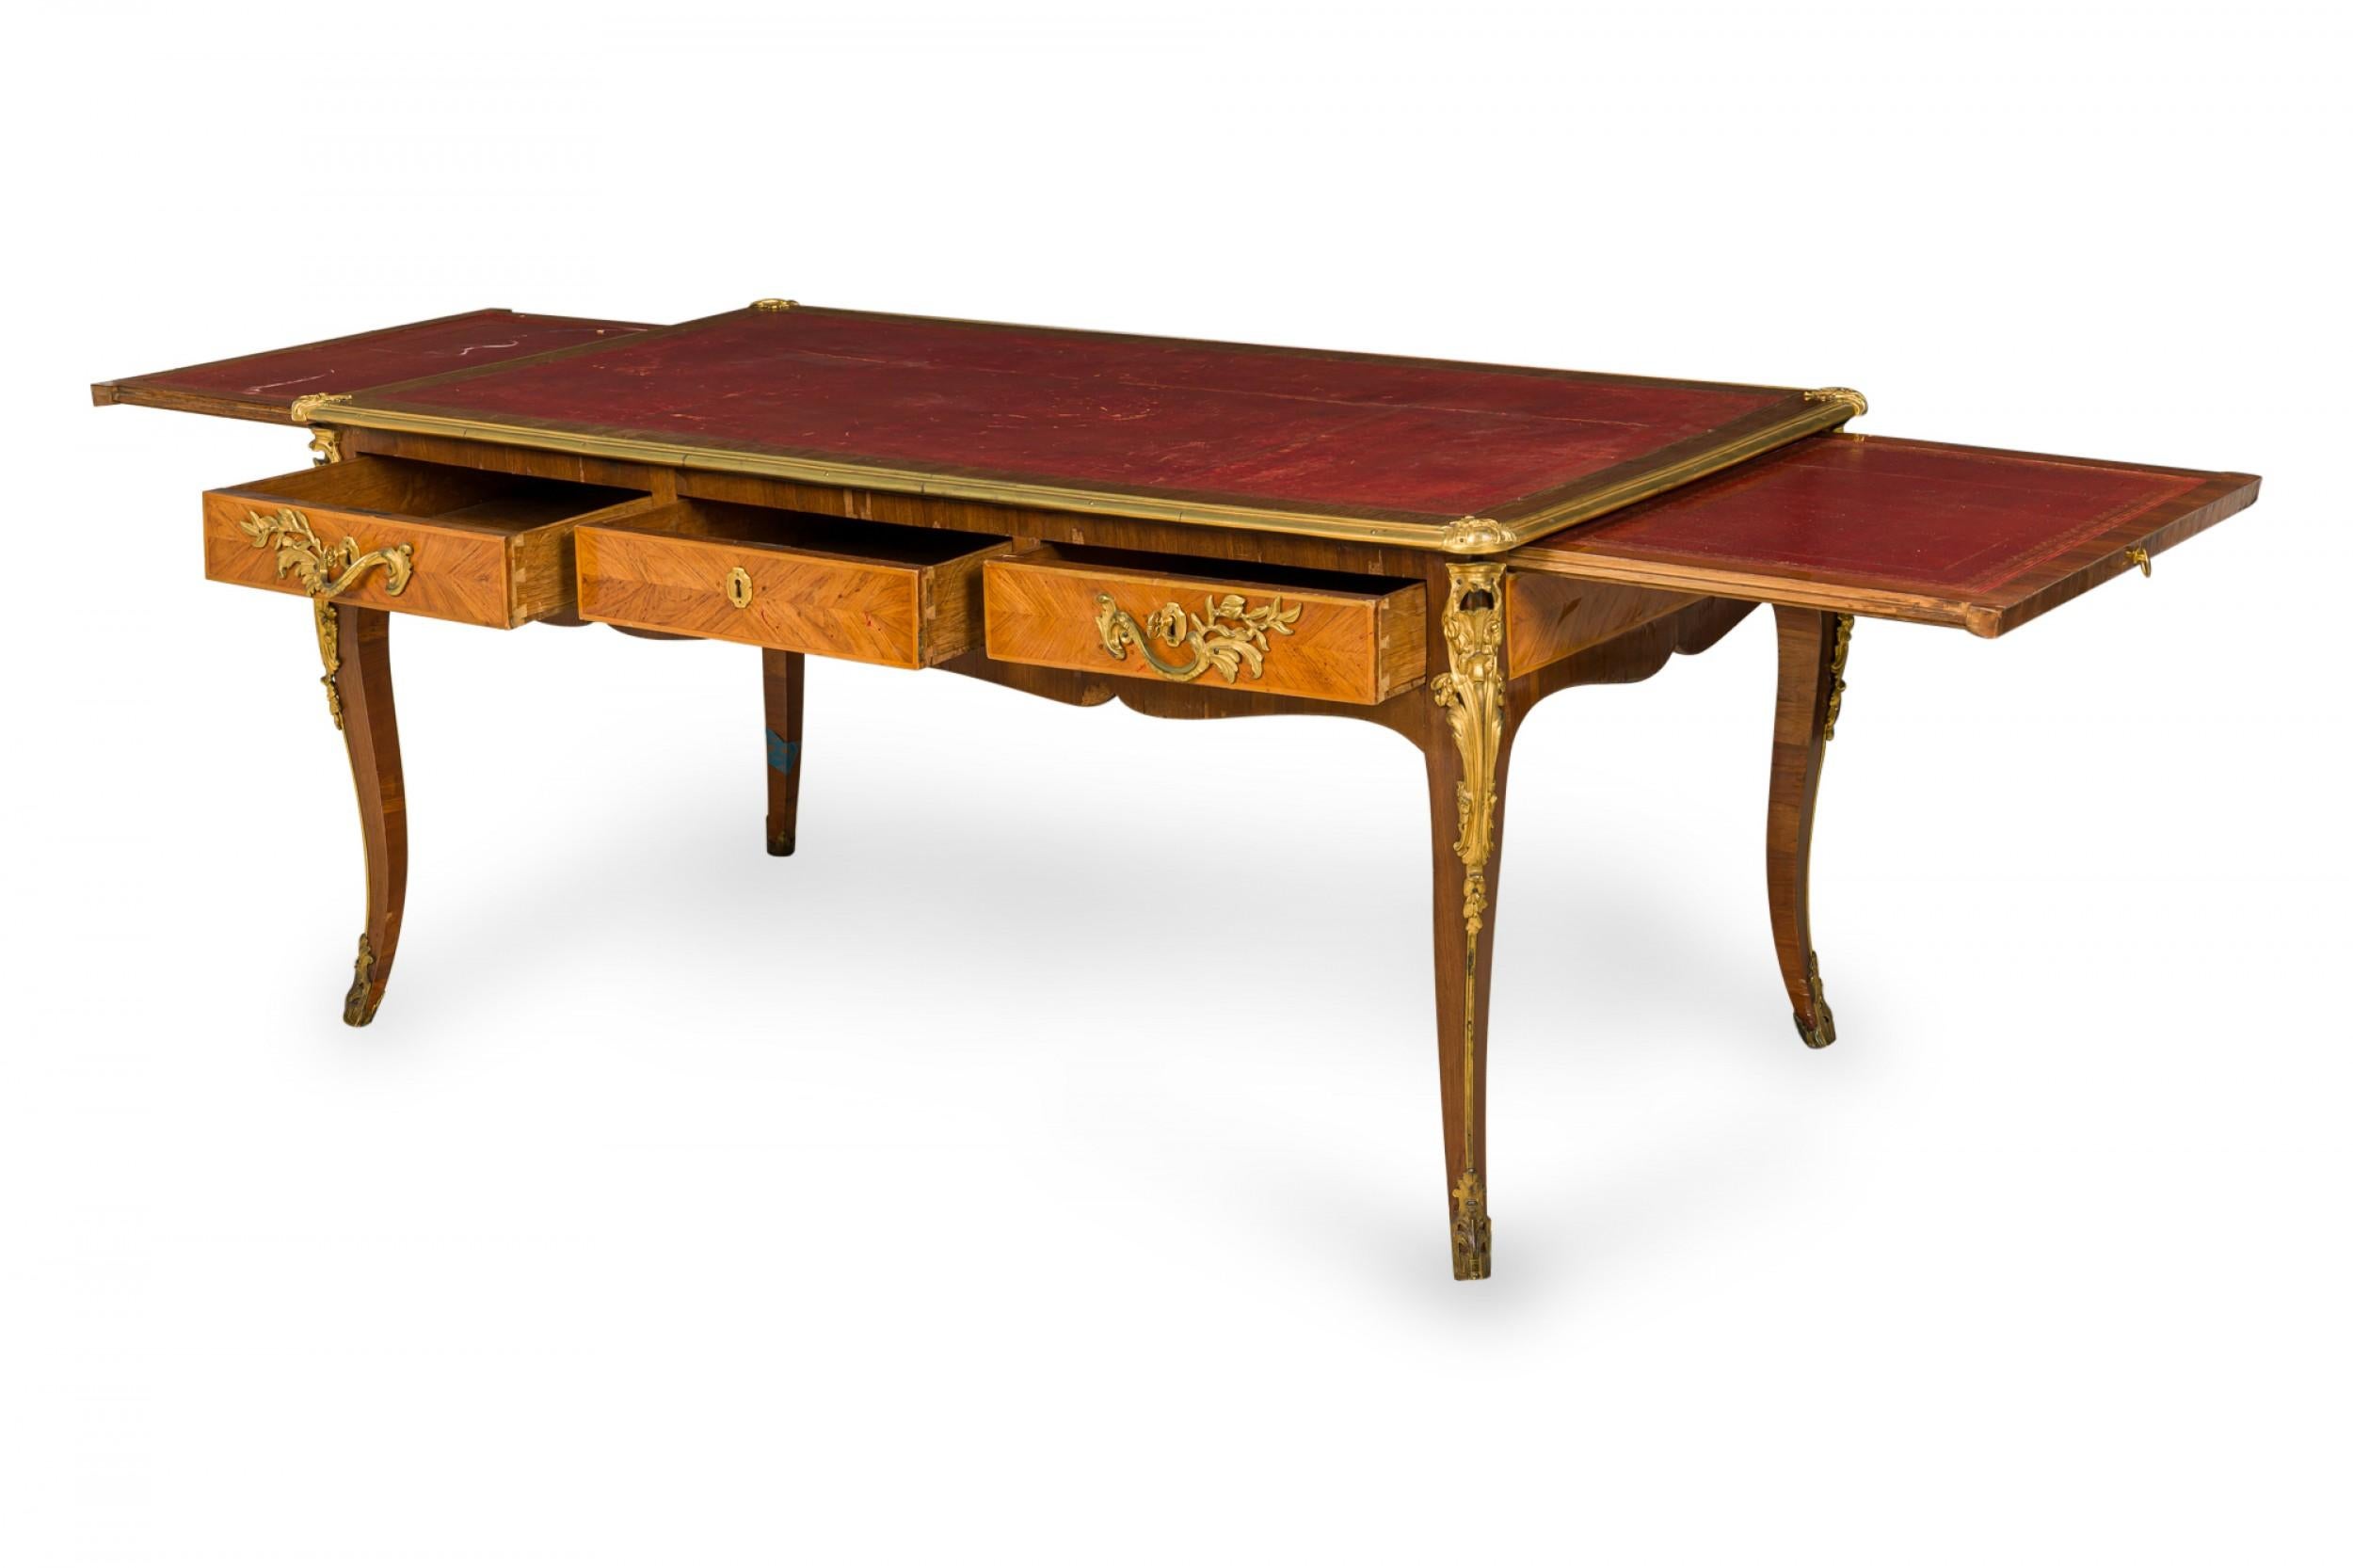 French Louis XVI style (19th century) writing desk with kingwood veneer, a rectangular red leather desktop with embossed gold border and brass trim, with two extendable writing surfaces over three drawers with two elaborate ormolu drawer pulls a